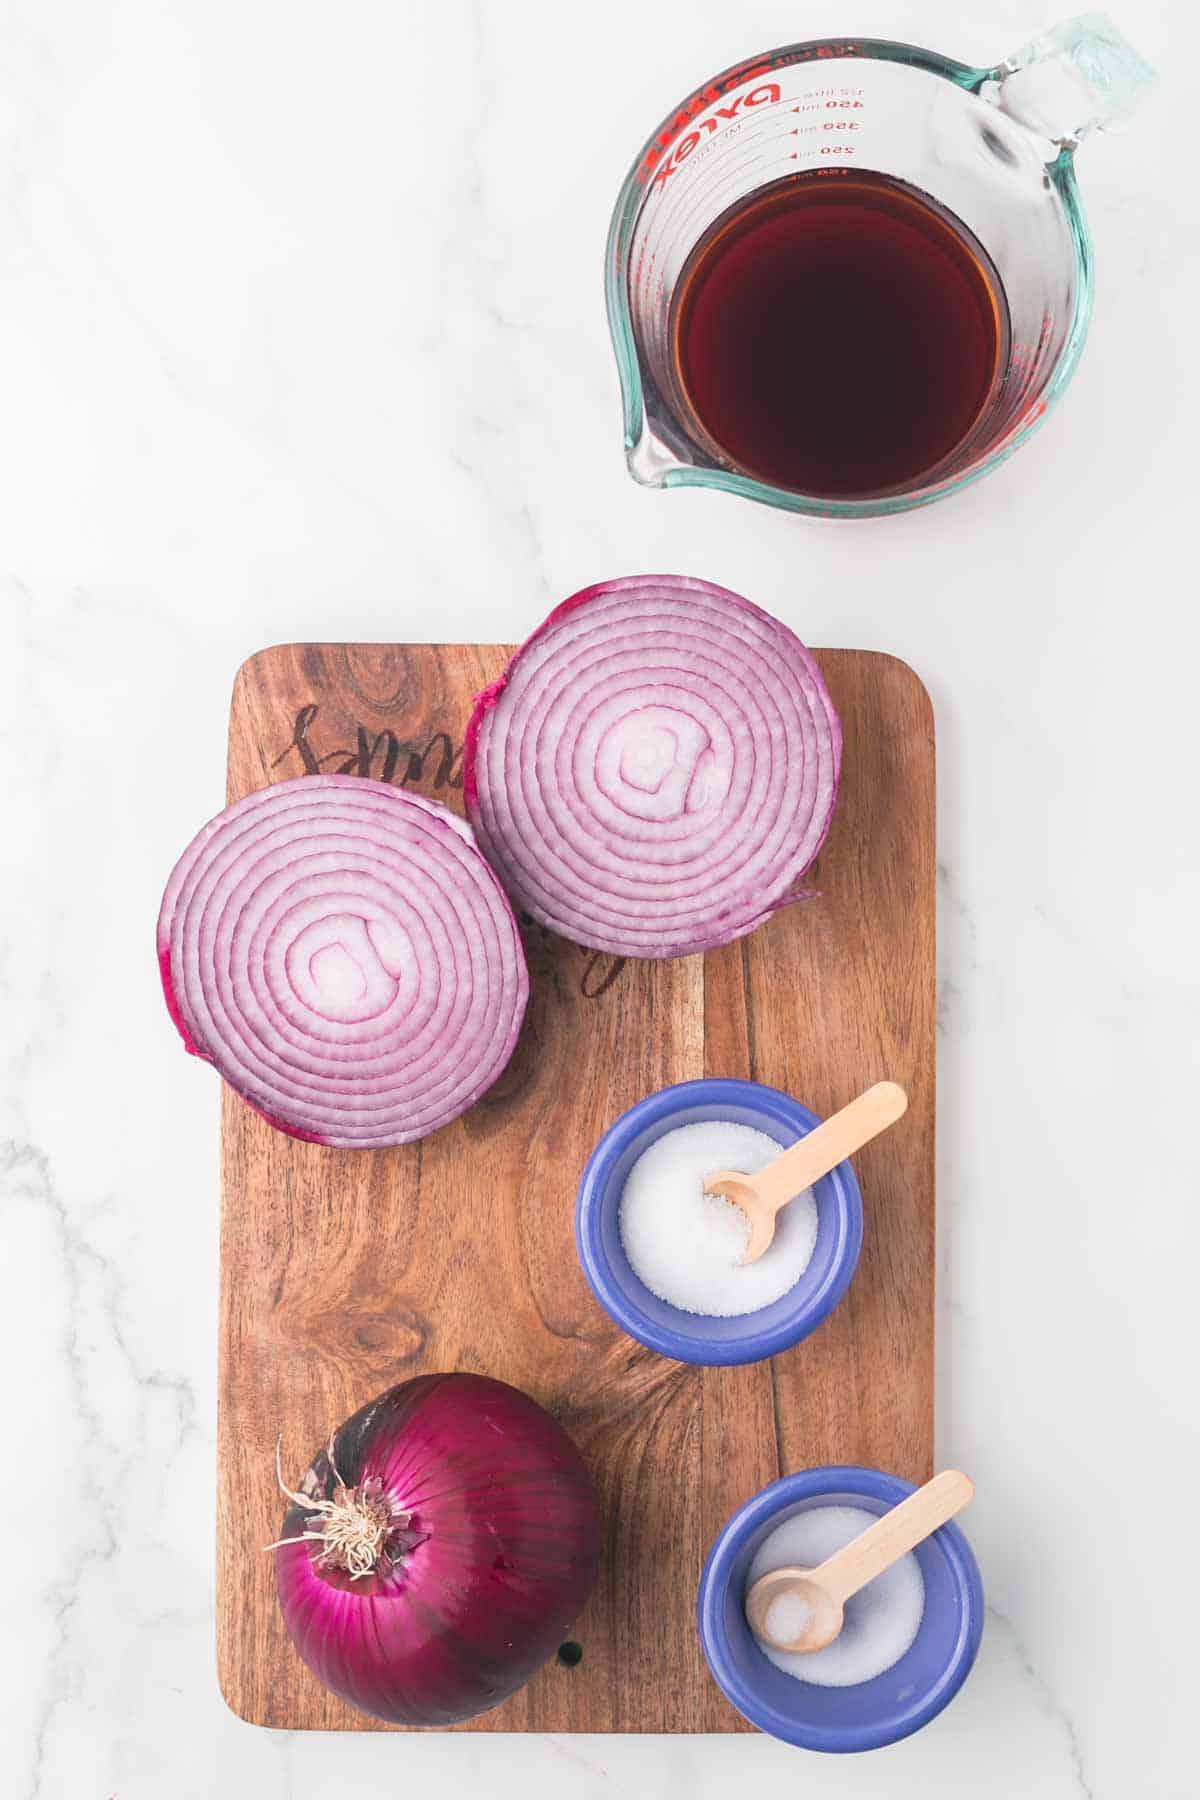 raw ingredients for pickled red onions on a wooden board